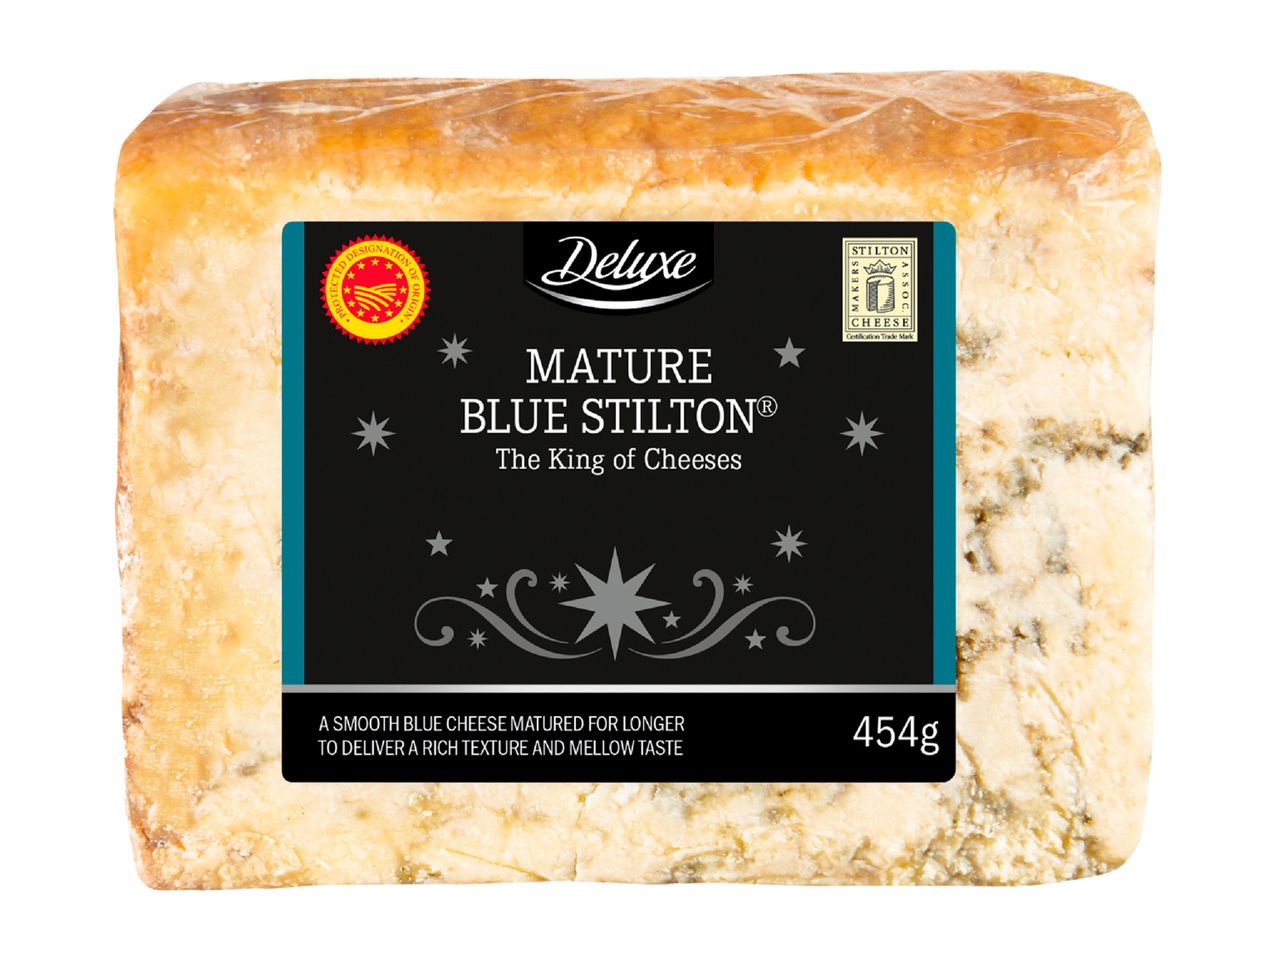 Go to full screen view: Deluxe Mature Blue Stilton Wedge - Image 1